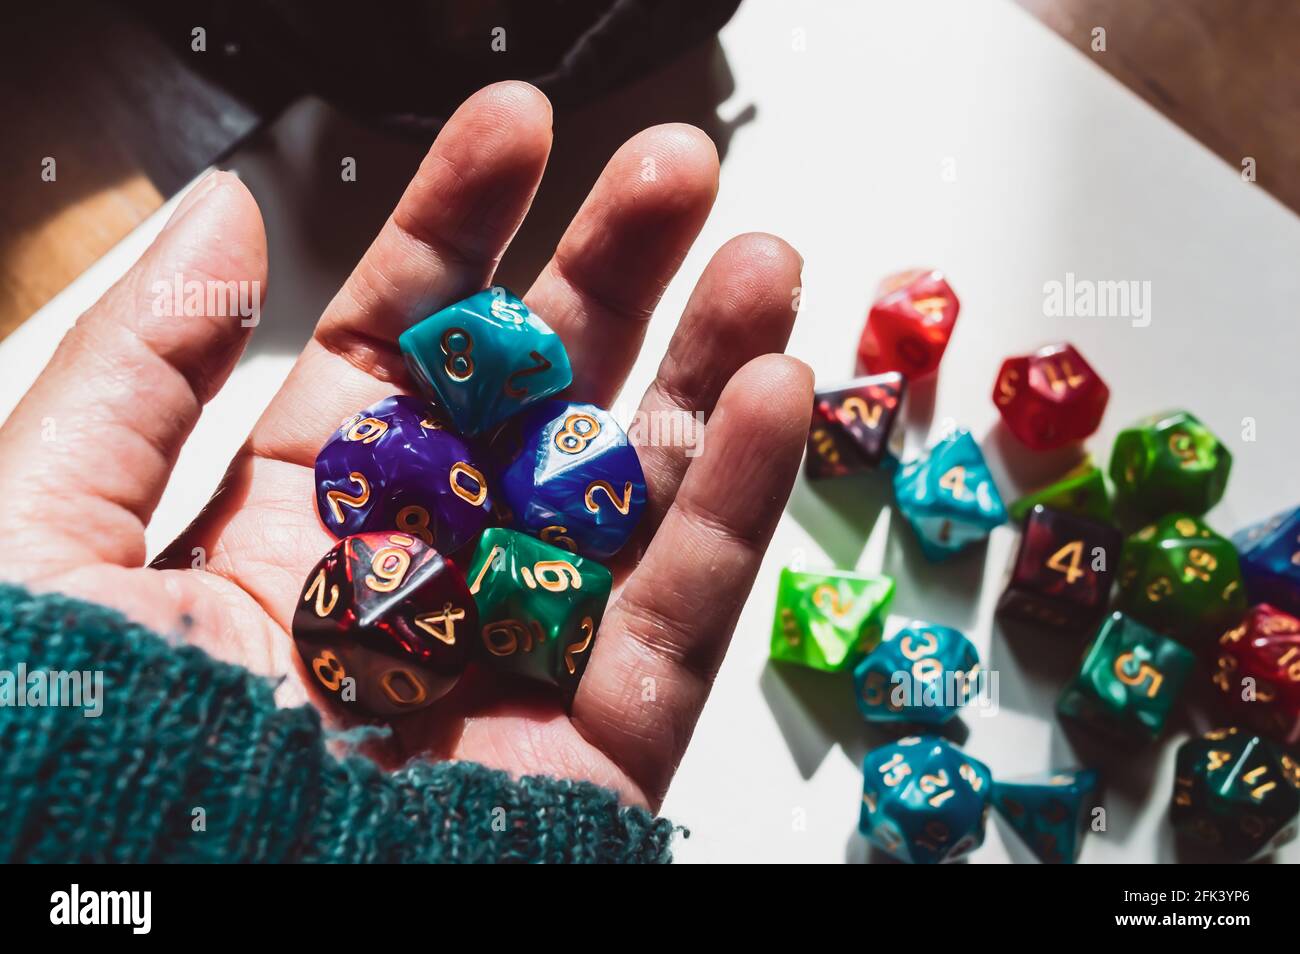 Rpg Game High Resolution Stock Photography and Images - Alamy